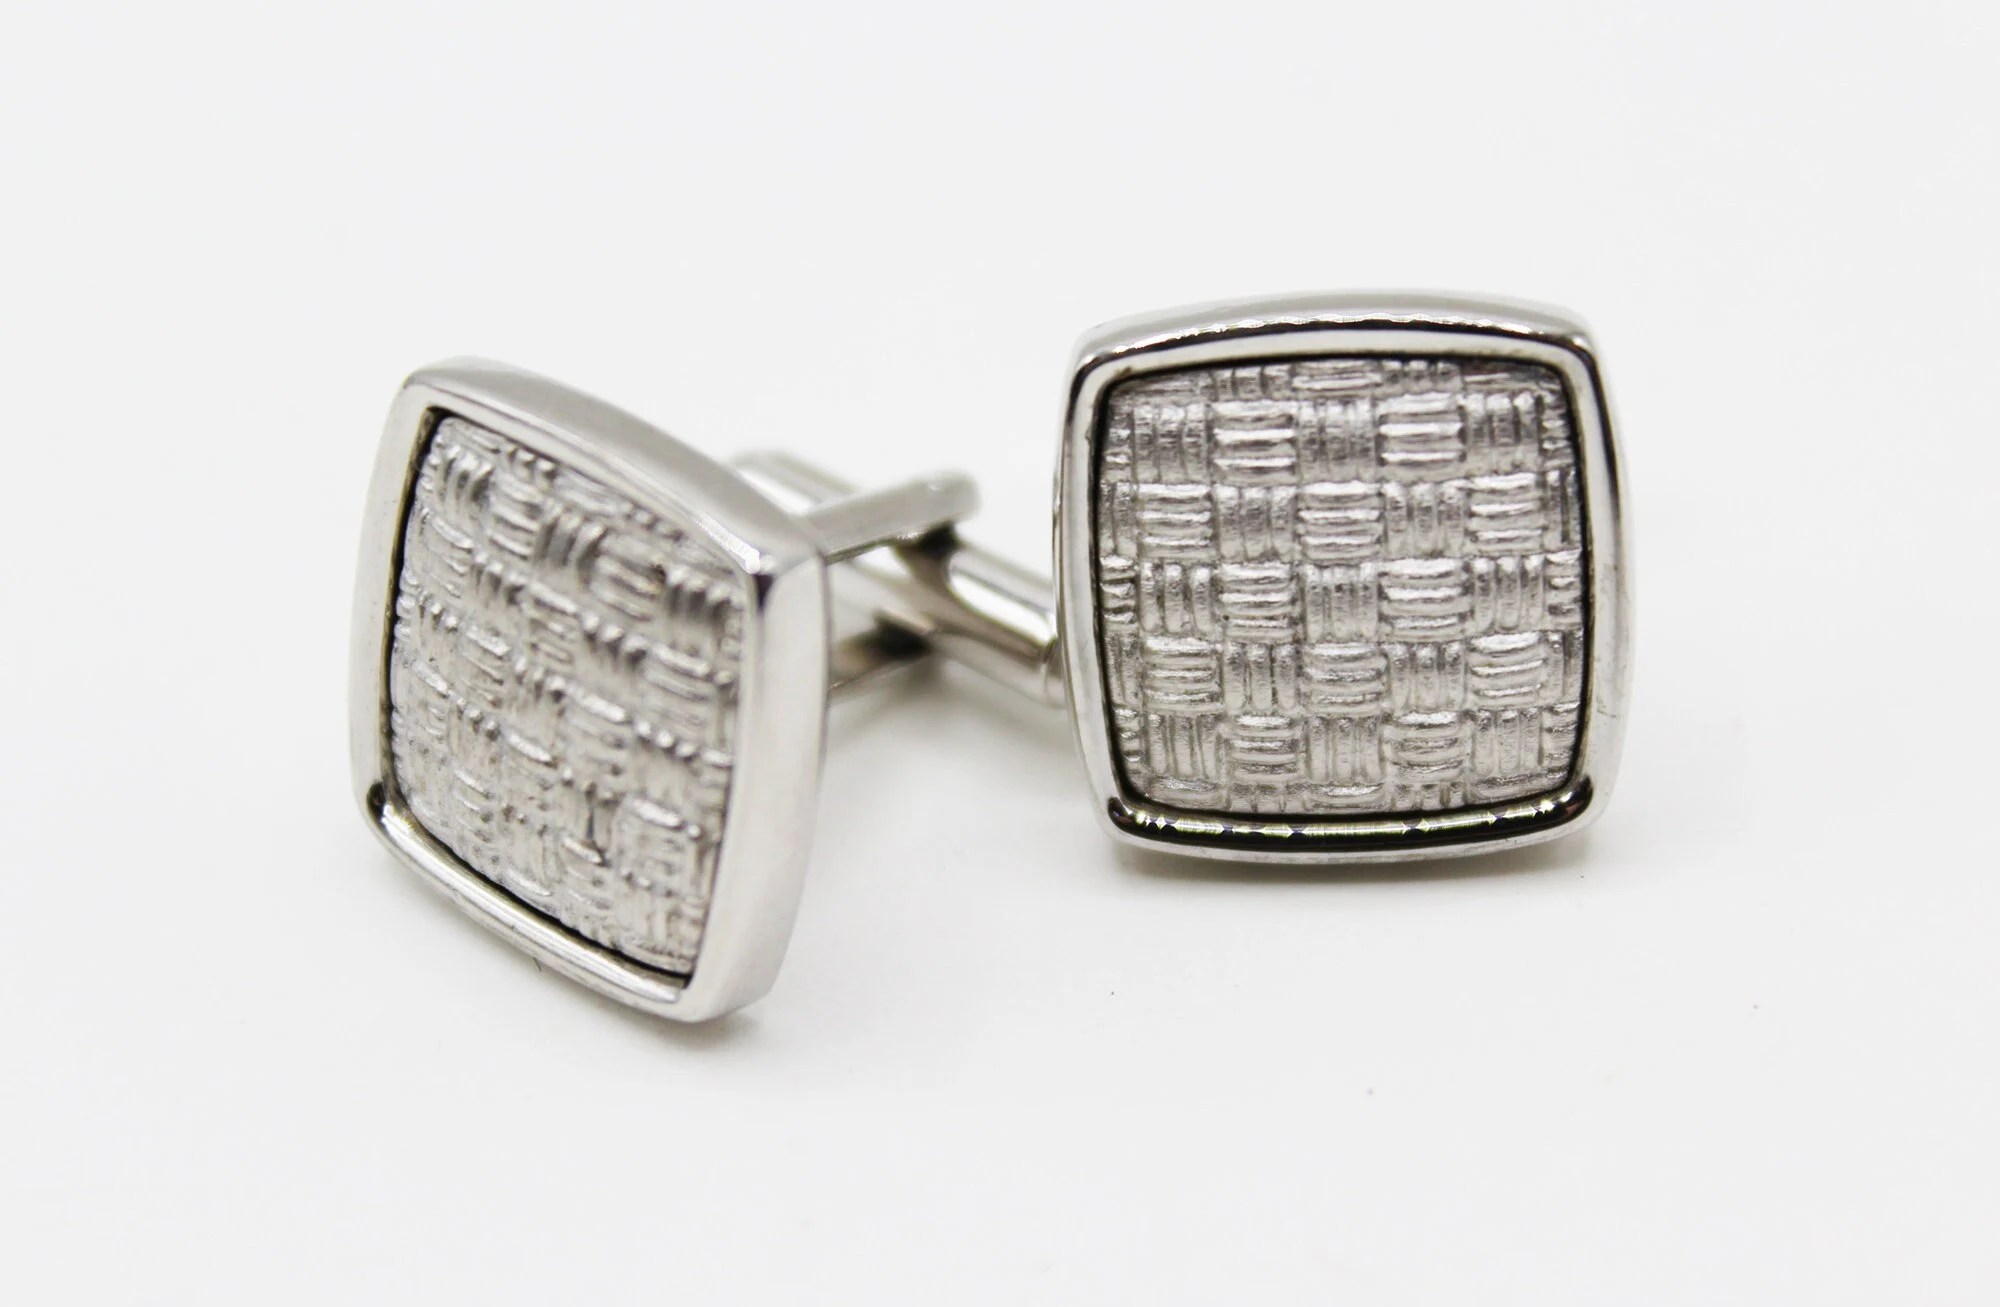 Square Checkerboard Silver Tone Textured Mens Cufflinks - Vintage, MCM Mid Century Retro Classic, Business Office, Gifts for Men, Cuff Links